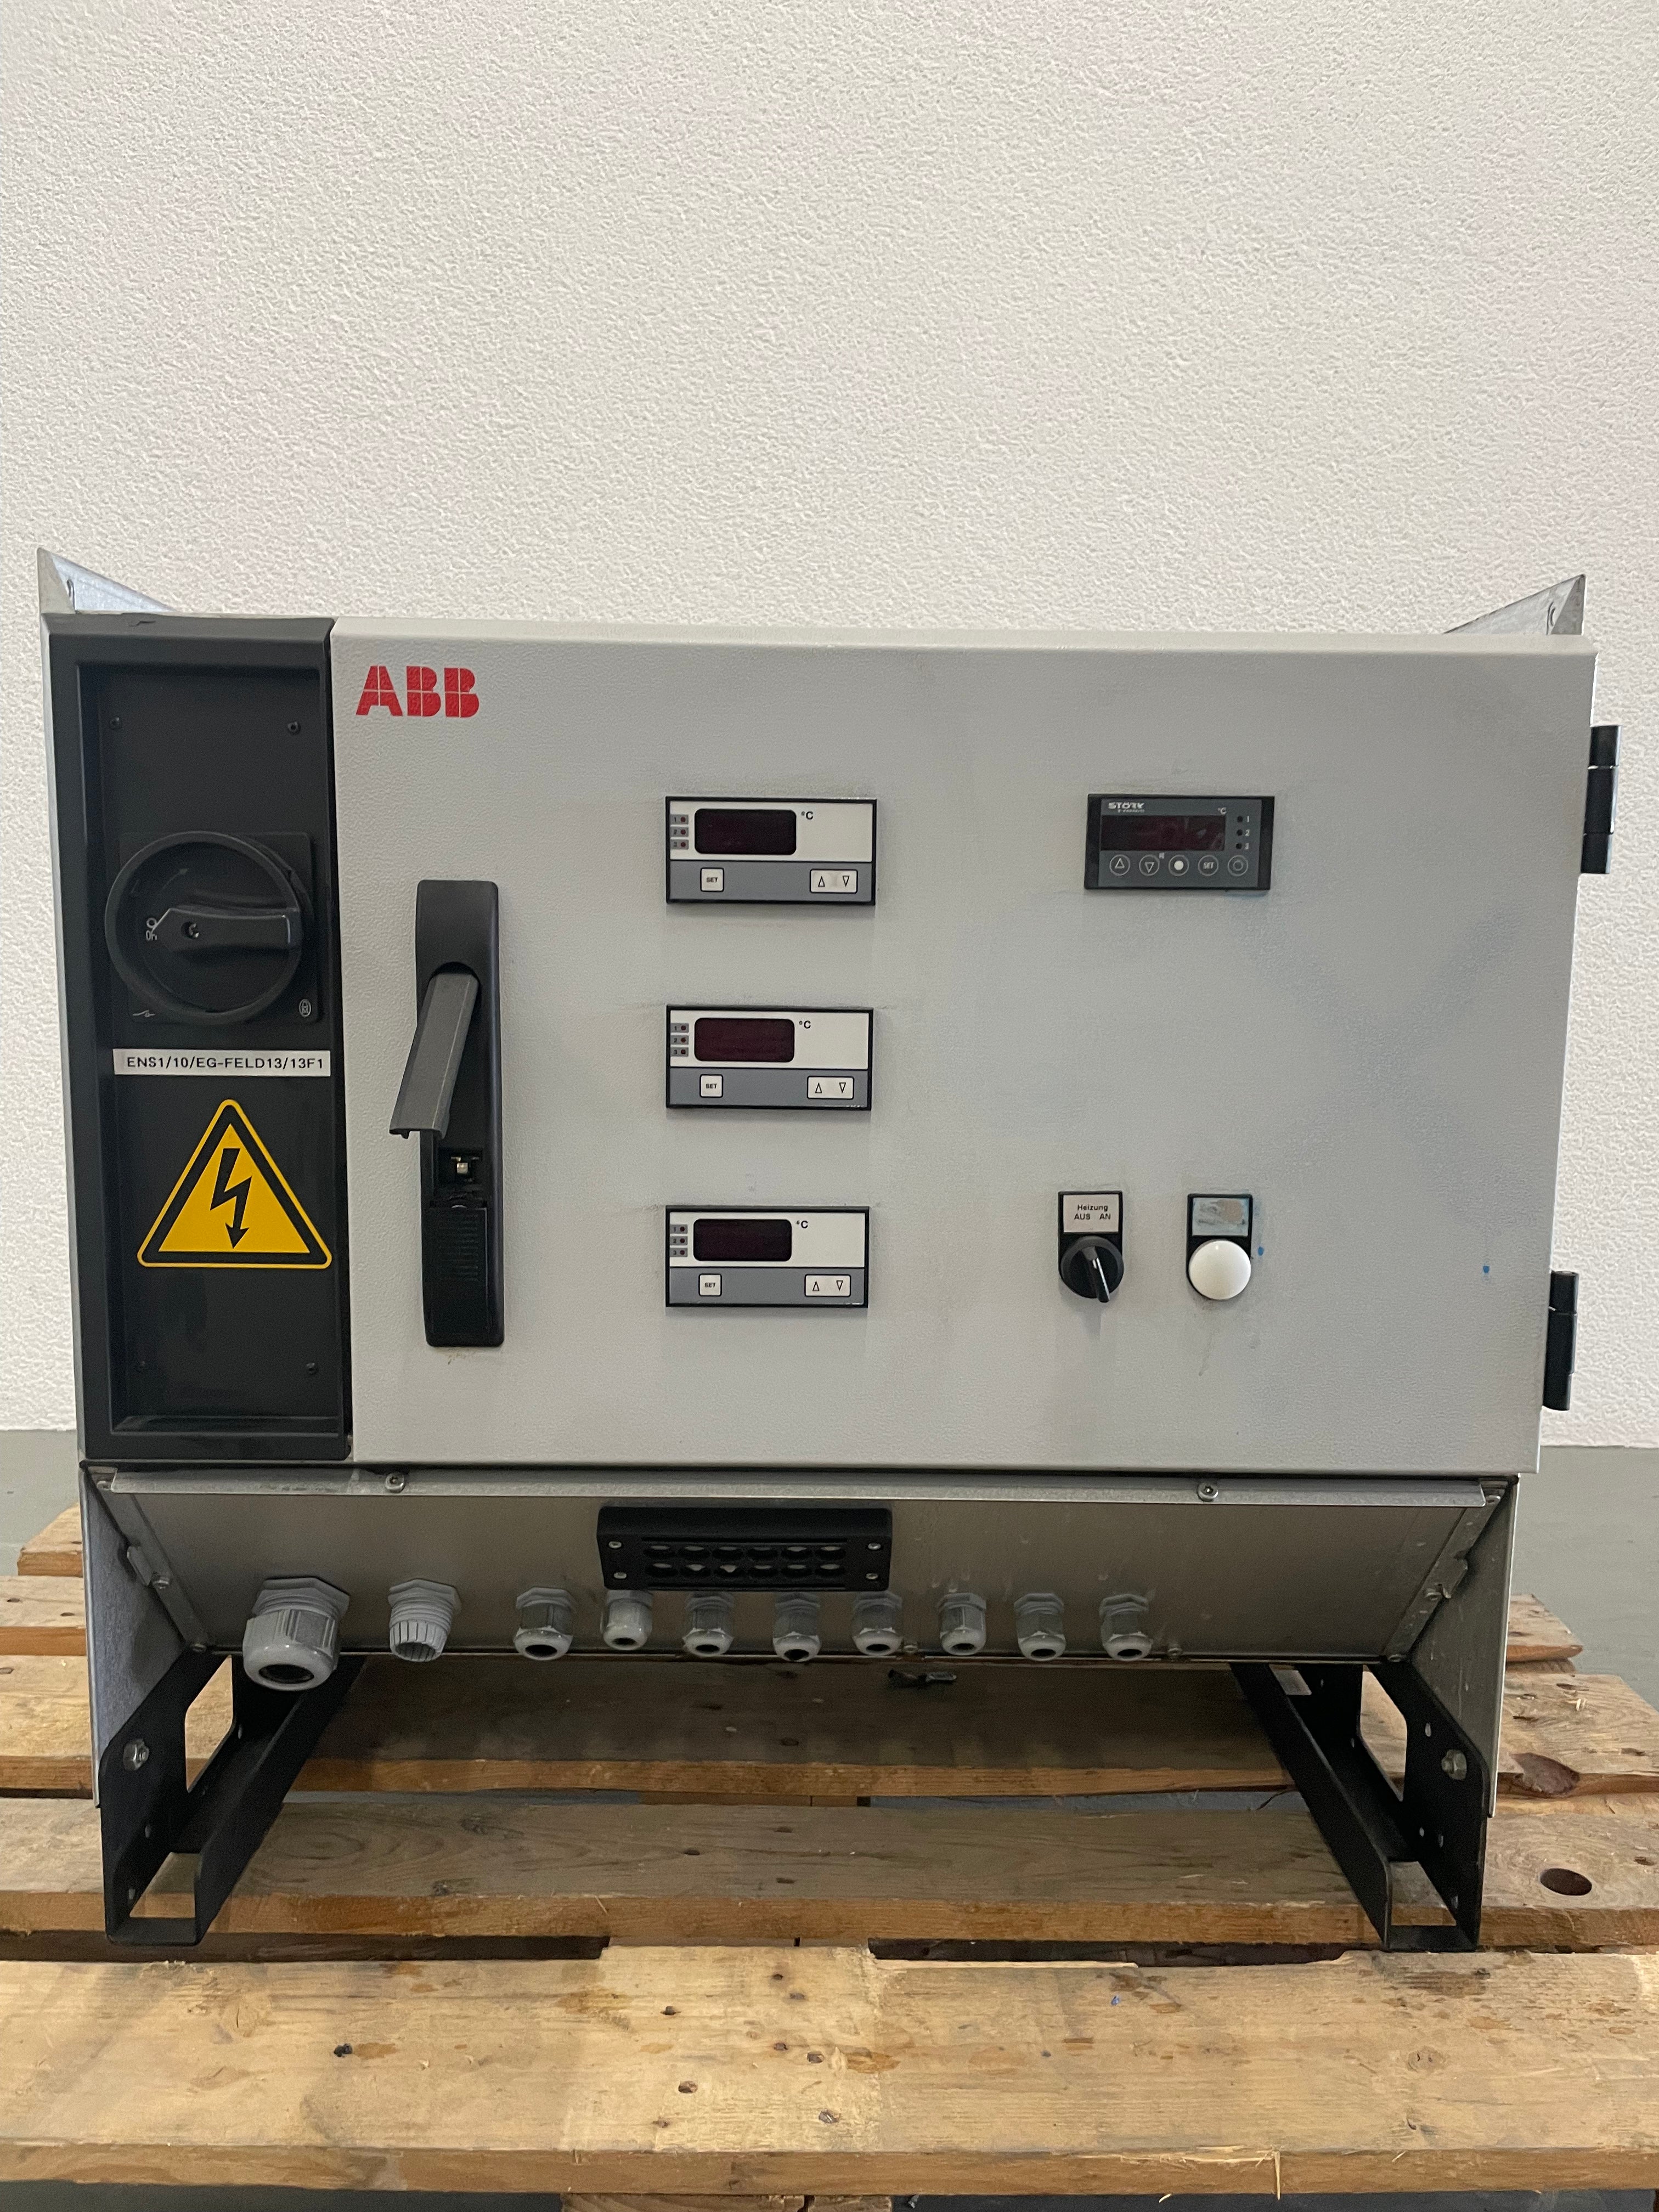 ABB housing systems with temperature control